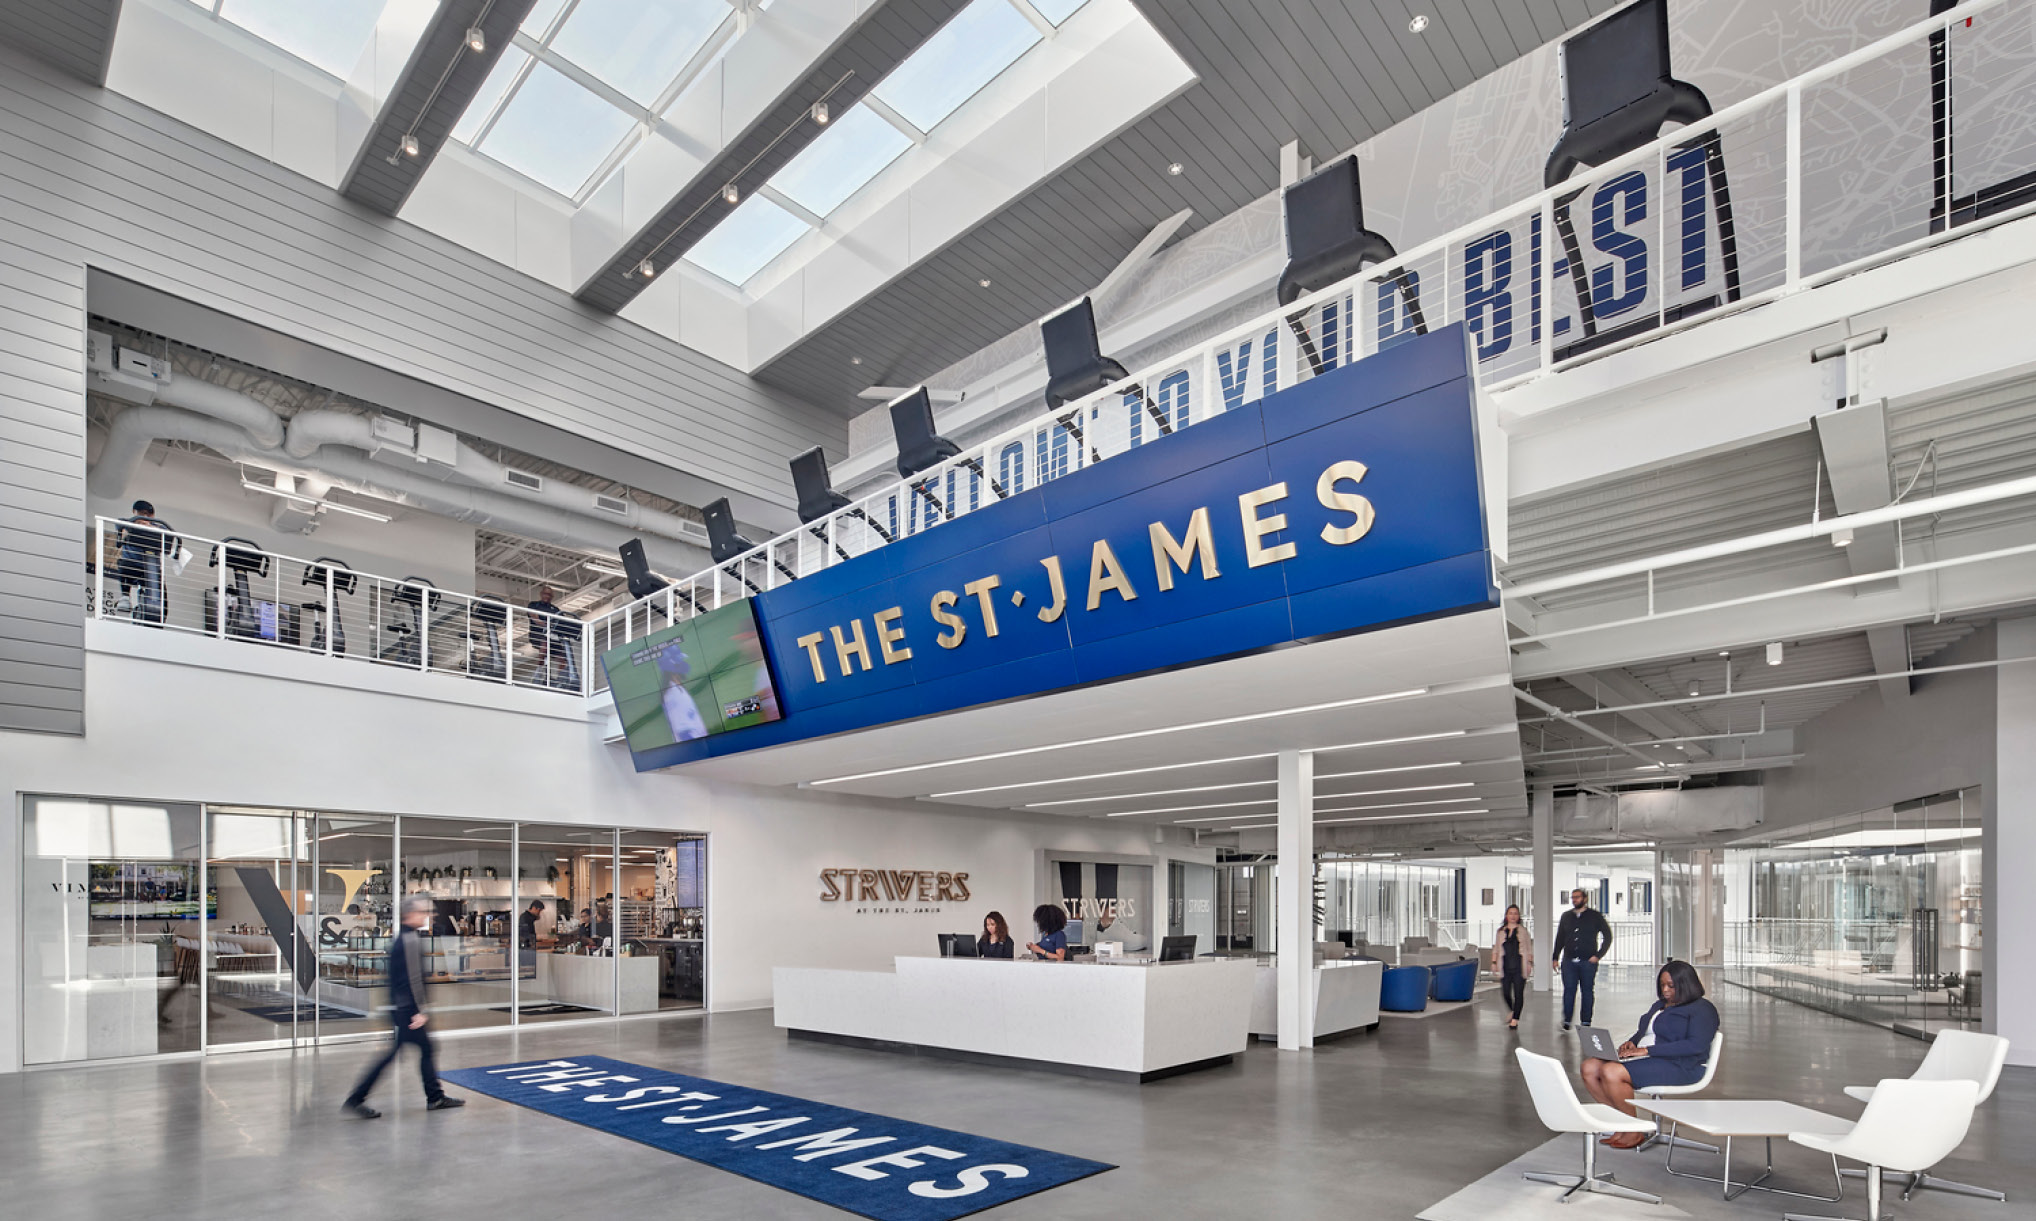 The St. James Sports and Athletics Center